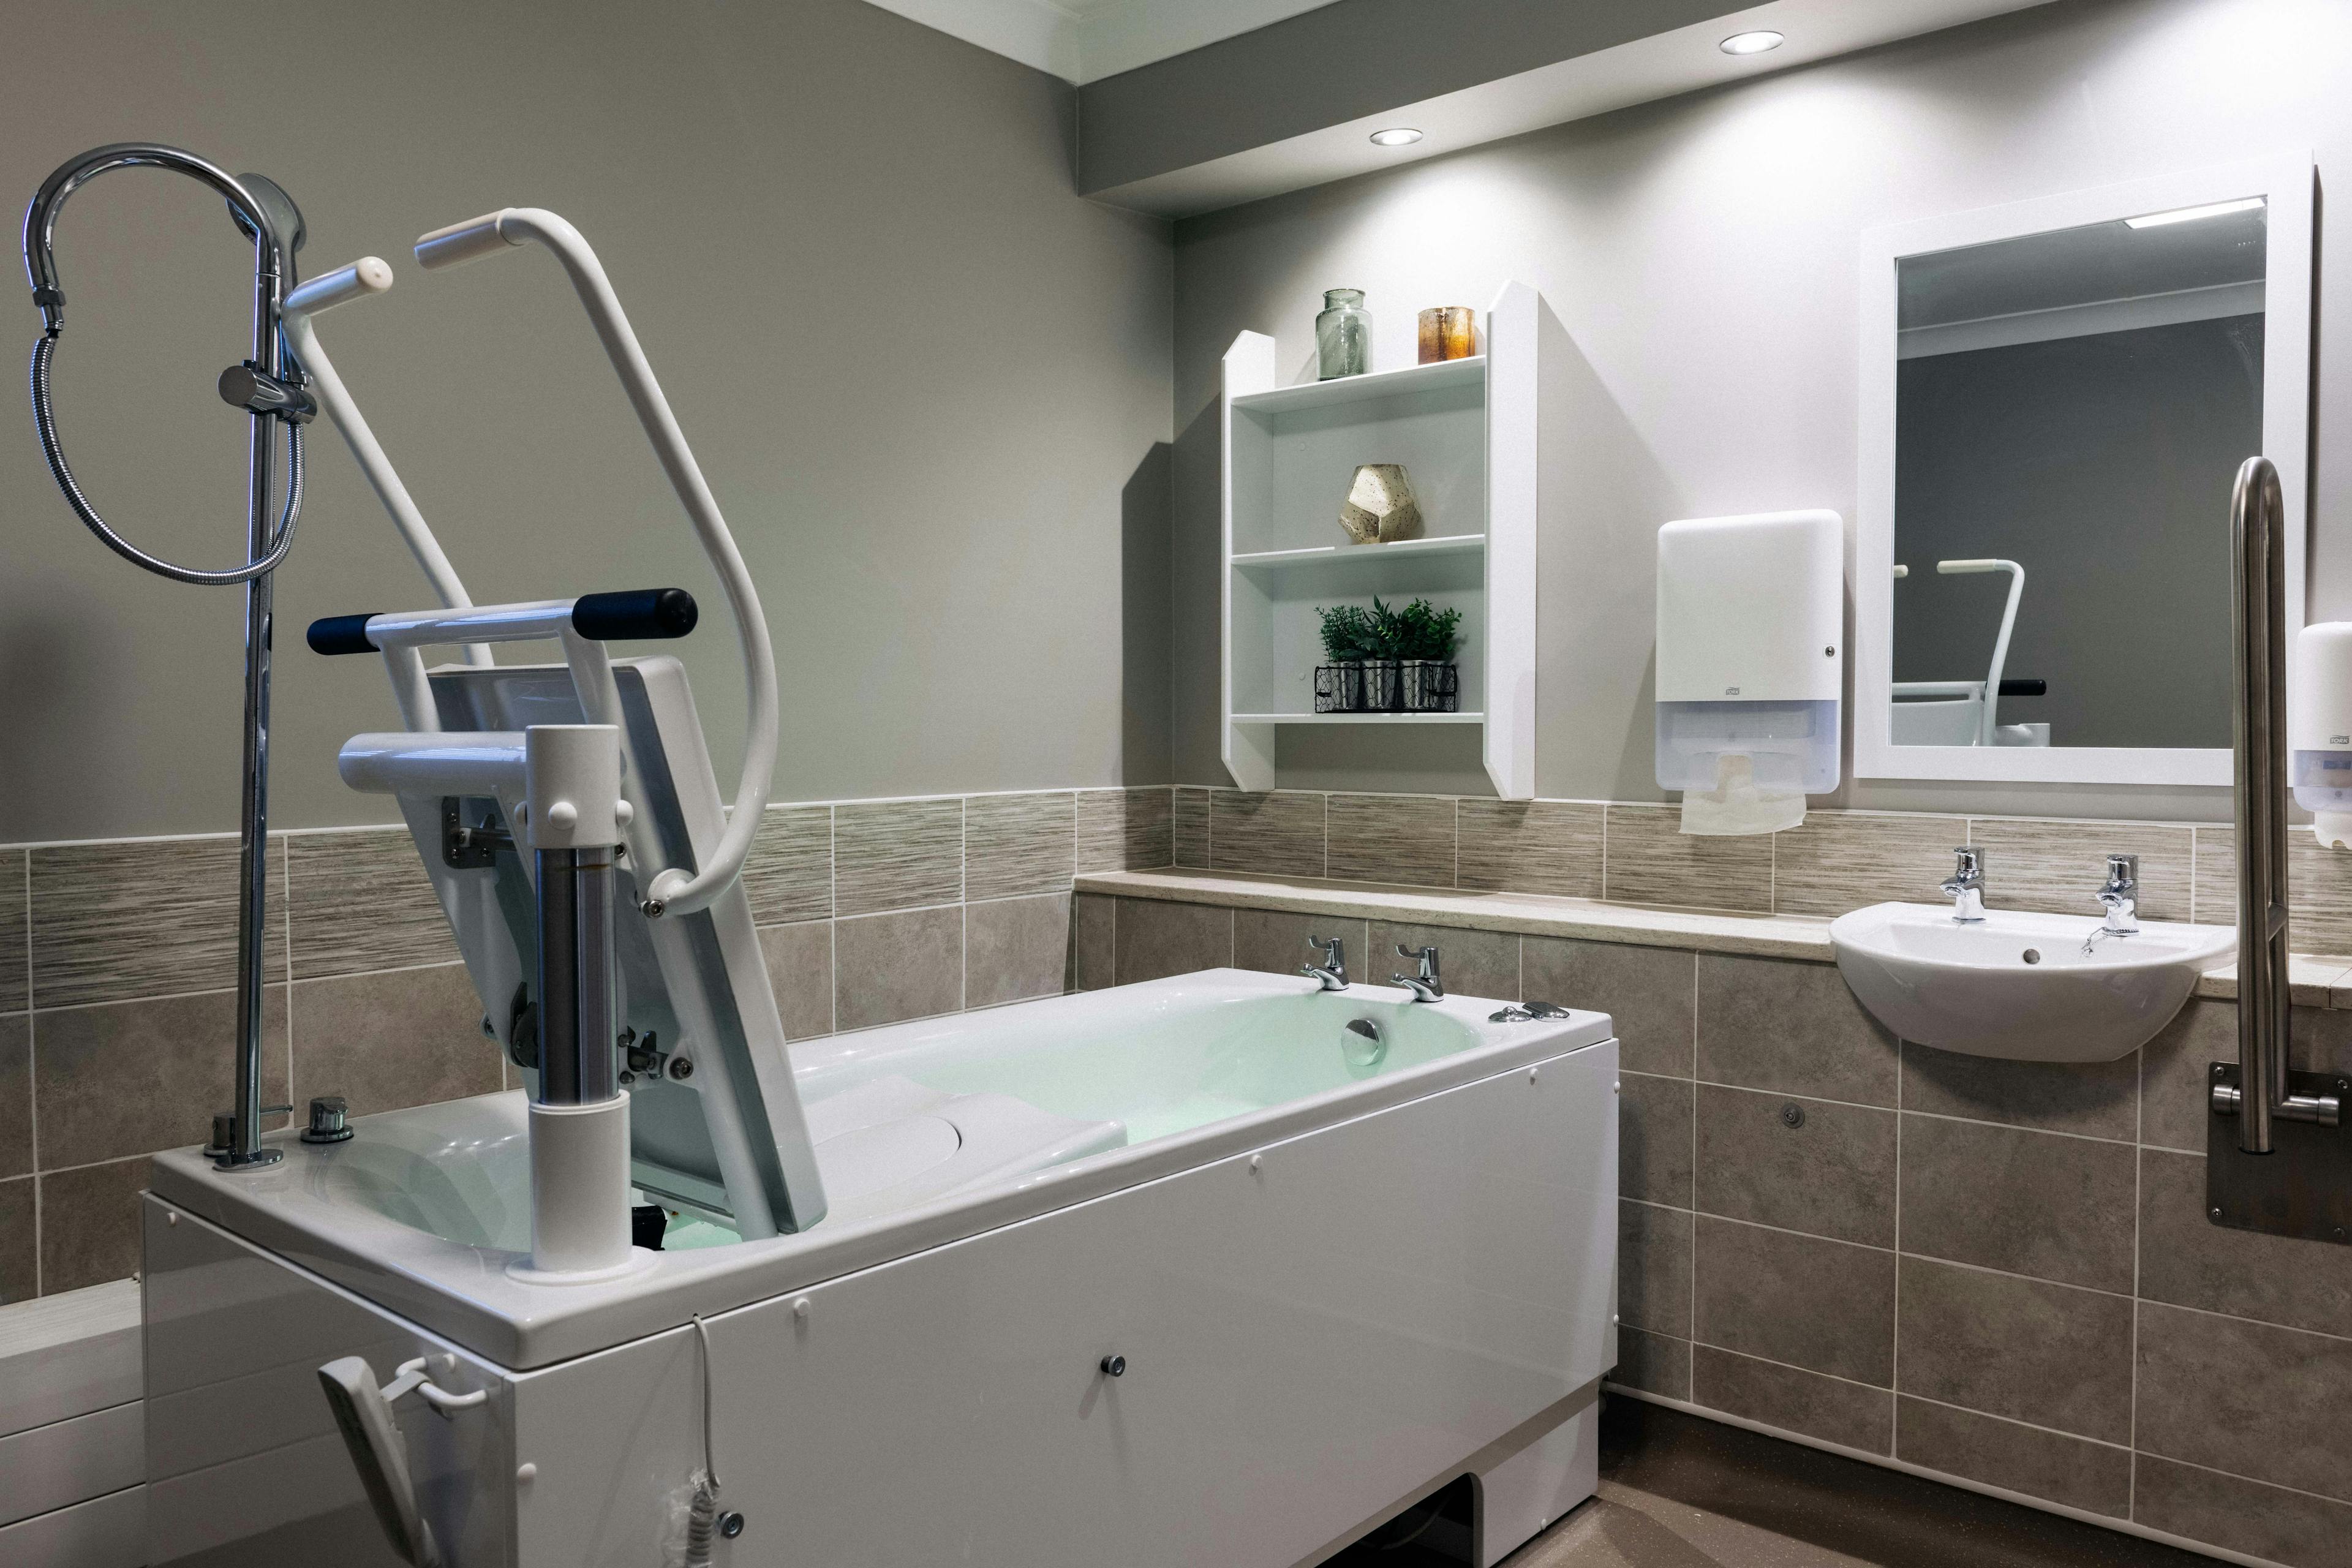 Spa Bathroom at Lochduhar Care Home in Dumfries and Galloway, The Stewartry of Kirkcudbright